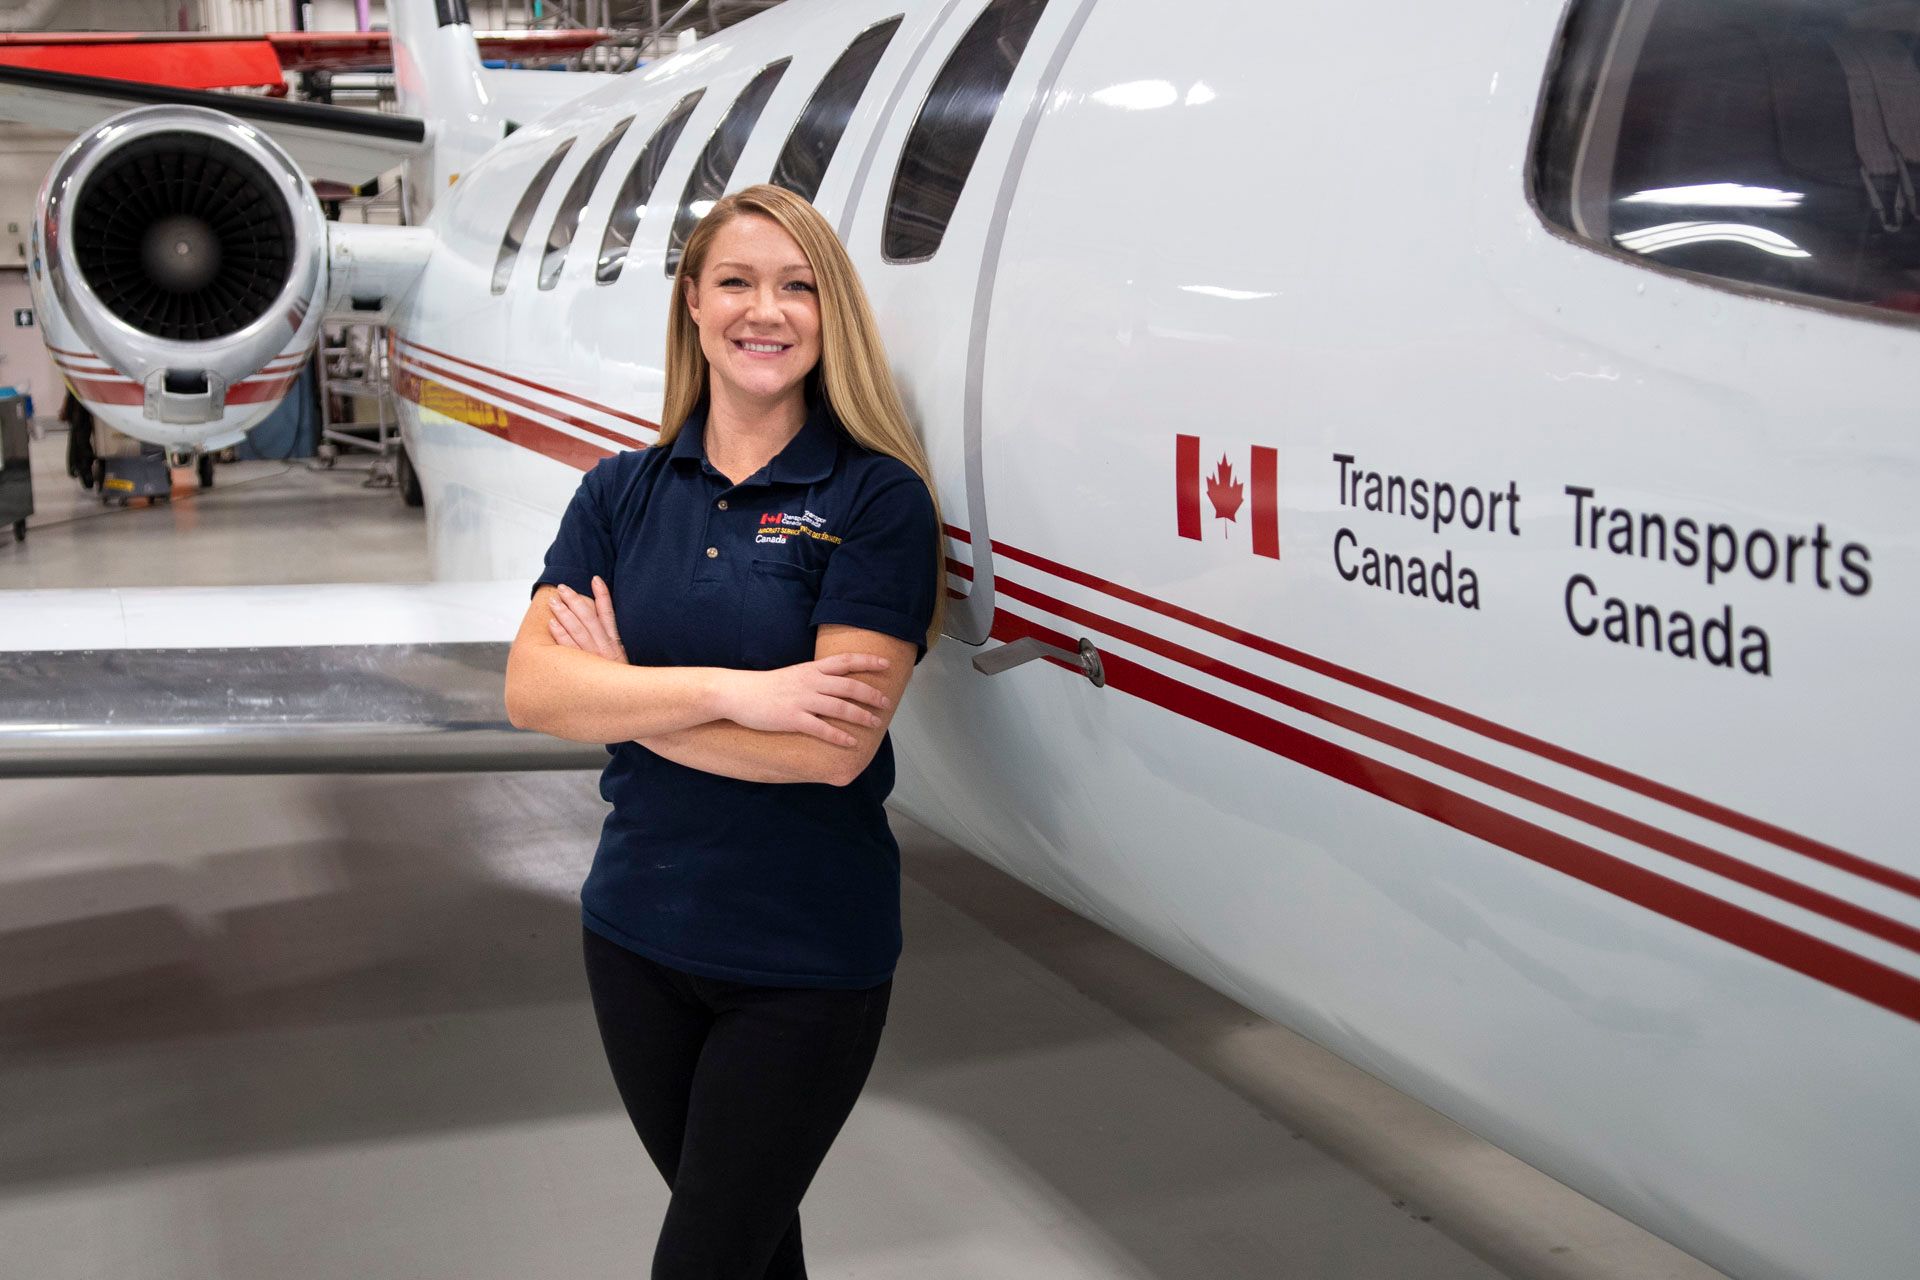 Michelle Maye, from Transport Canada, poses in front of the Transport Canada Citation